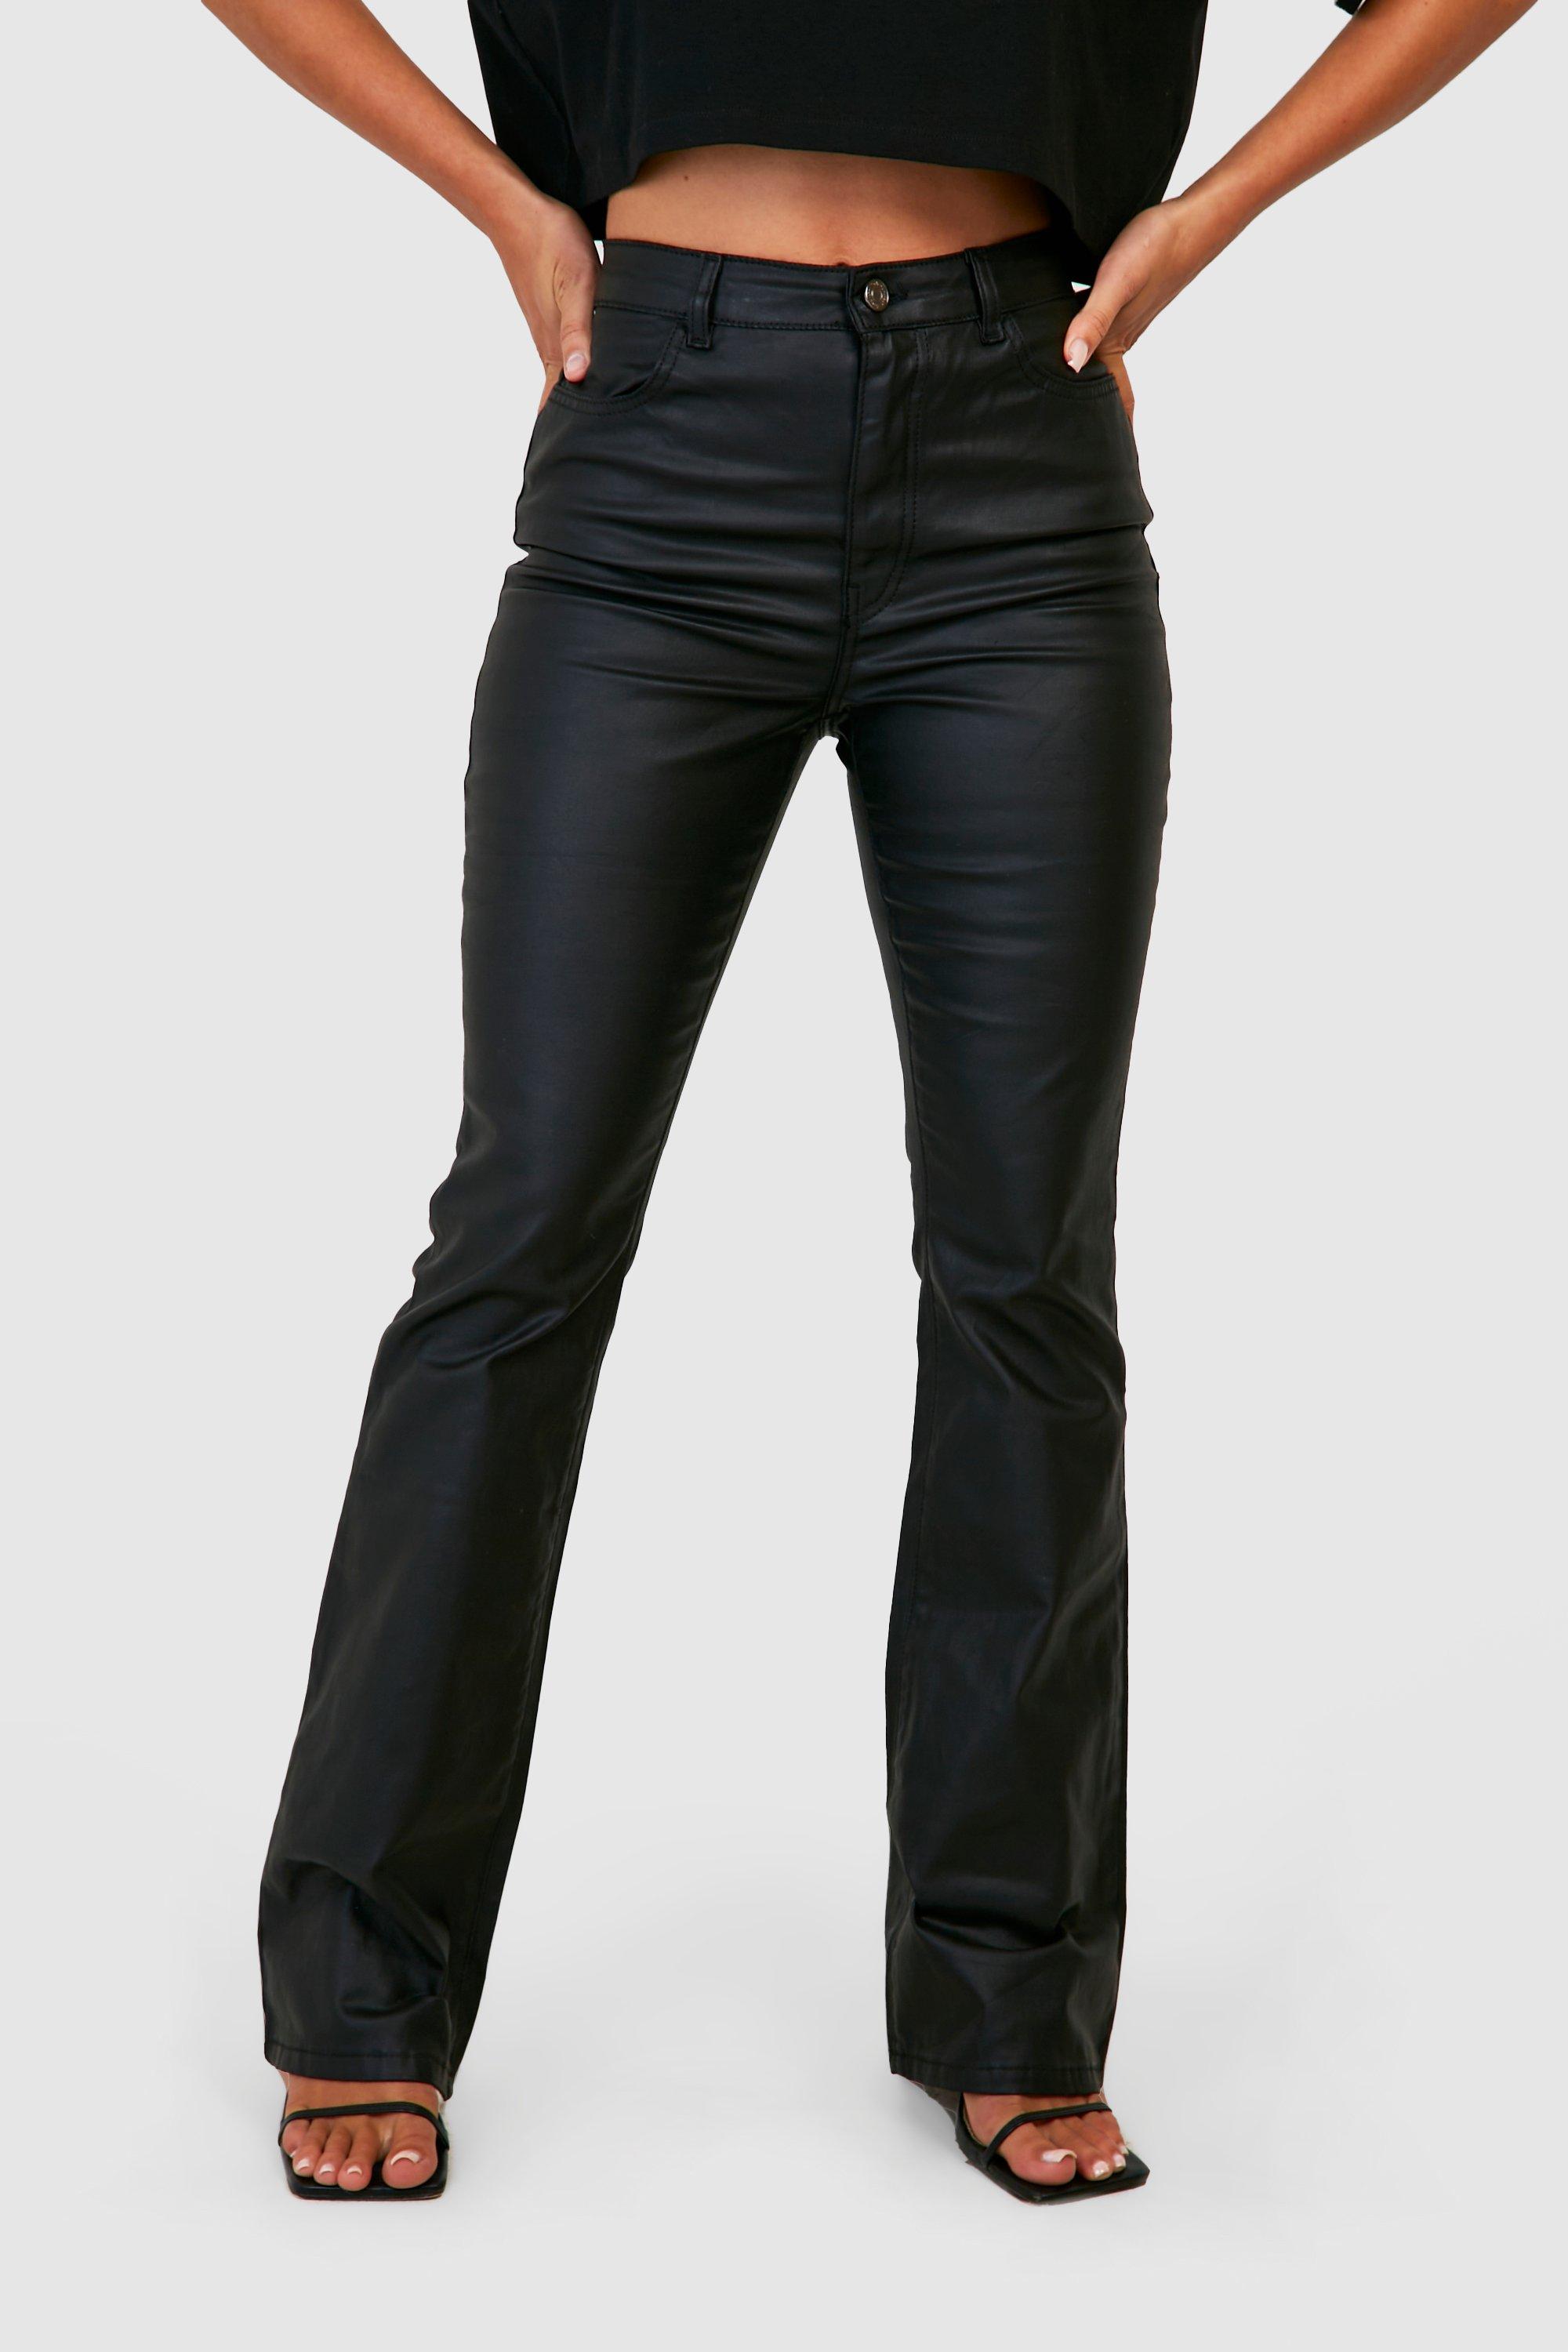 Women's Coated High Waisted Flared Jeans